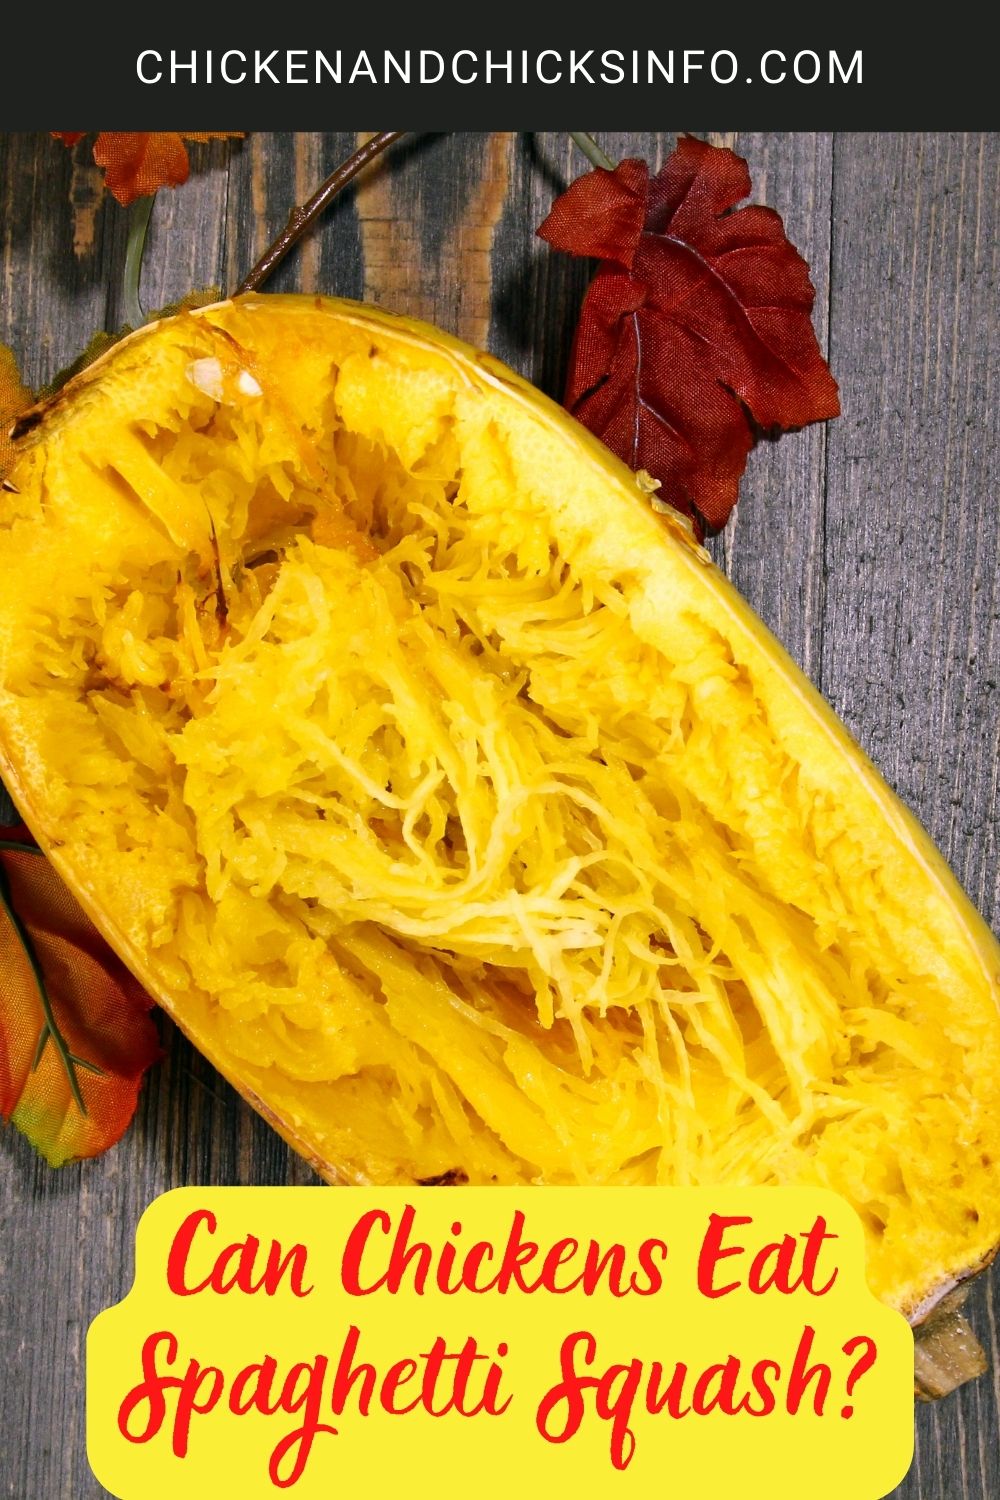 Can Chickens Eat Spaghetti Squash? poster.
